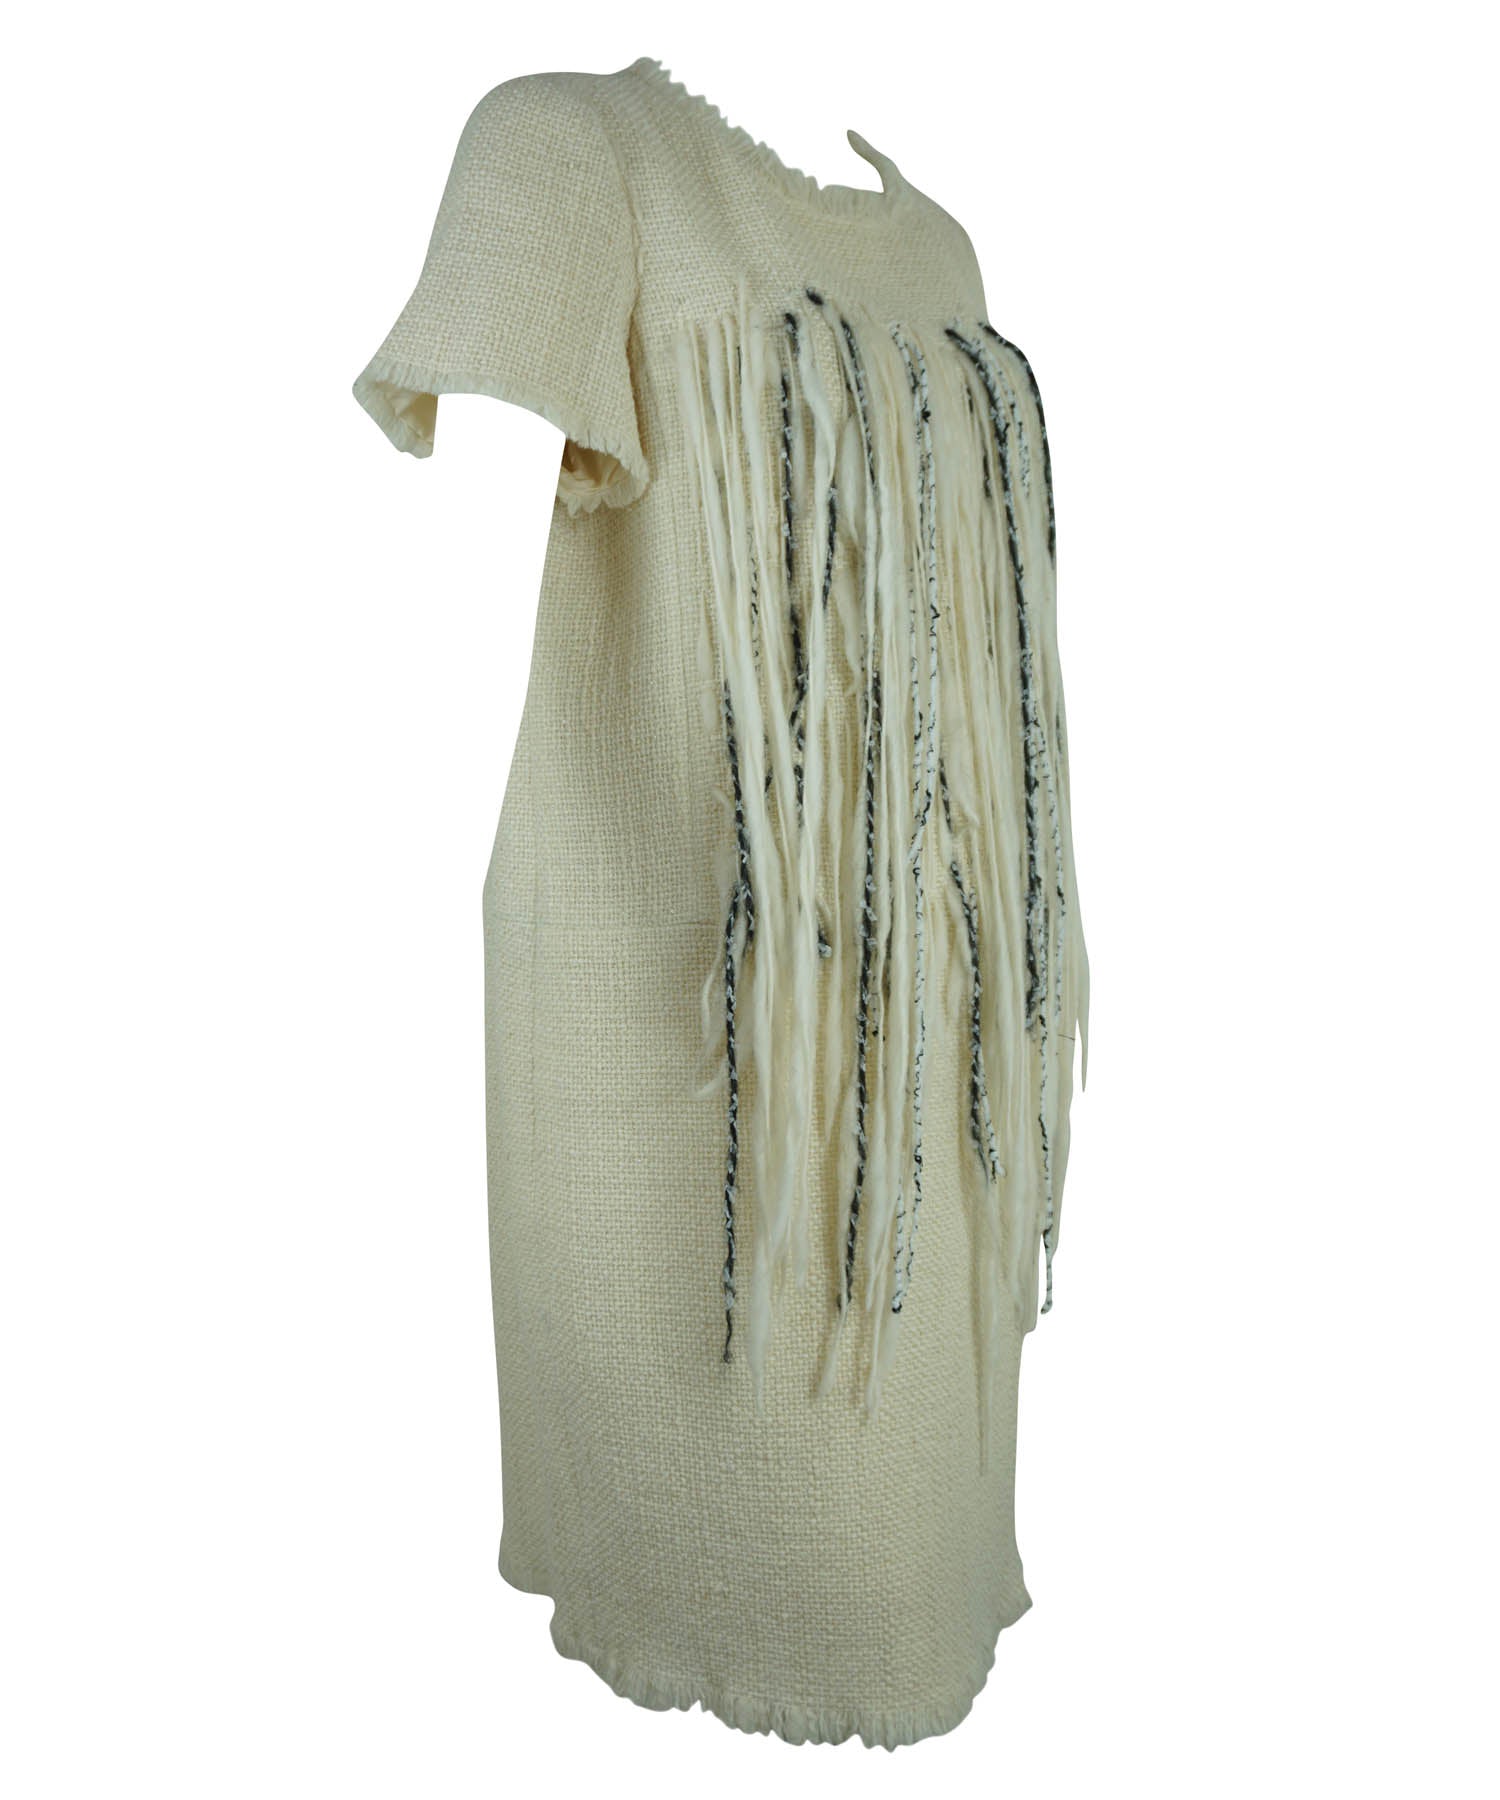 Chanel Tweed Dress with Pearl and Fringe Detail Sz 42 - Foxy Couture Carmel